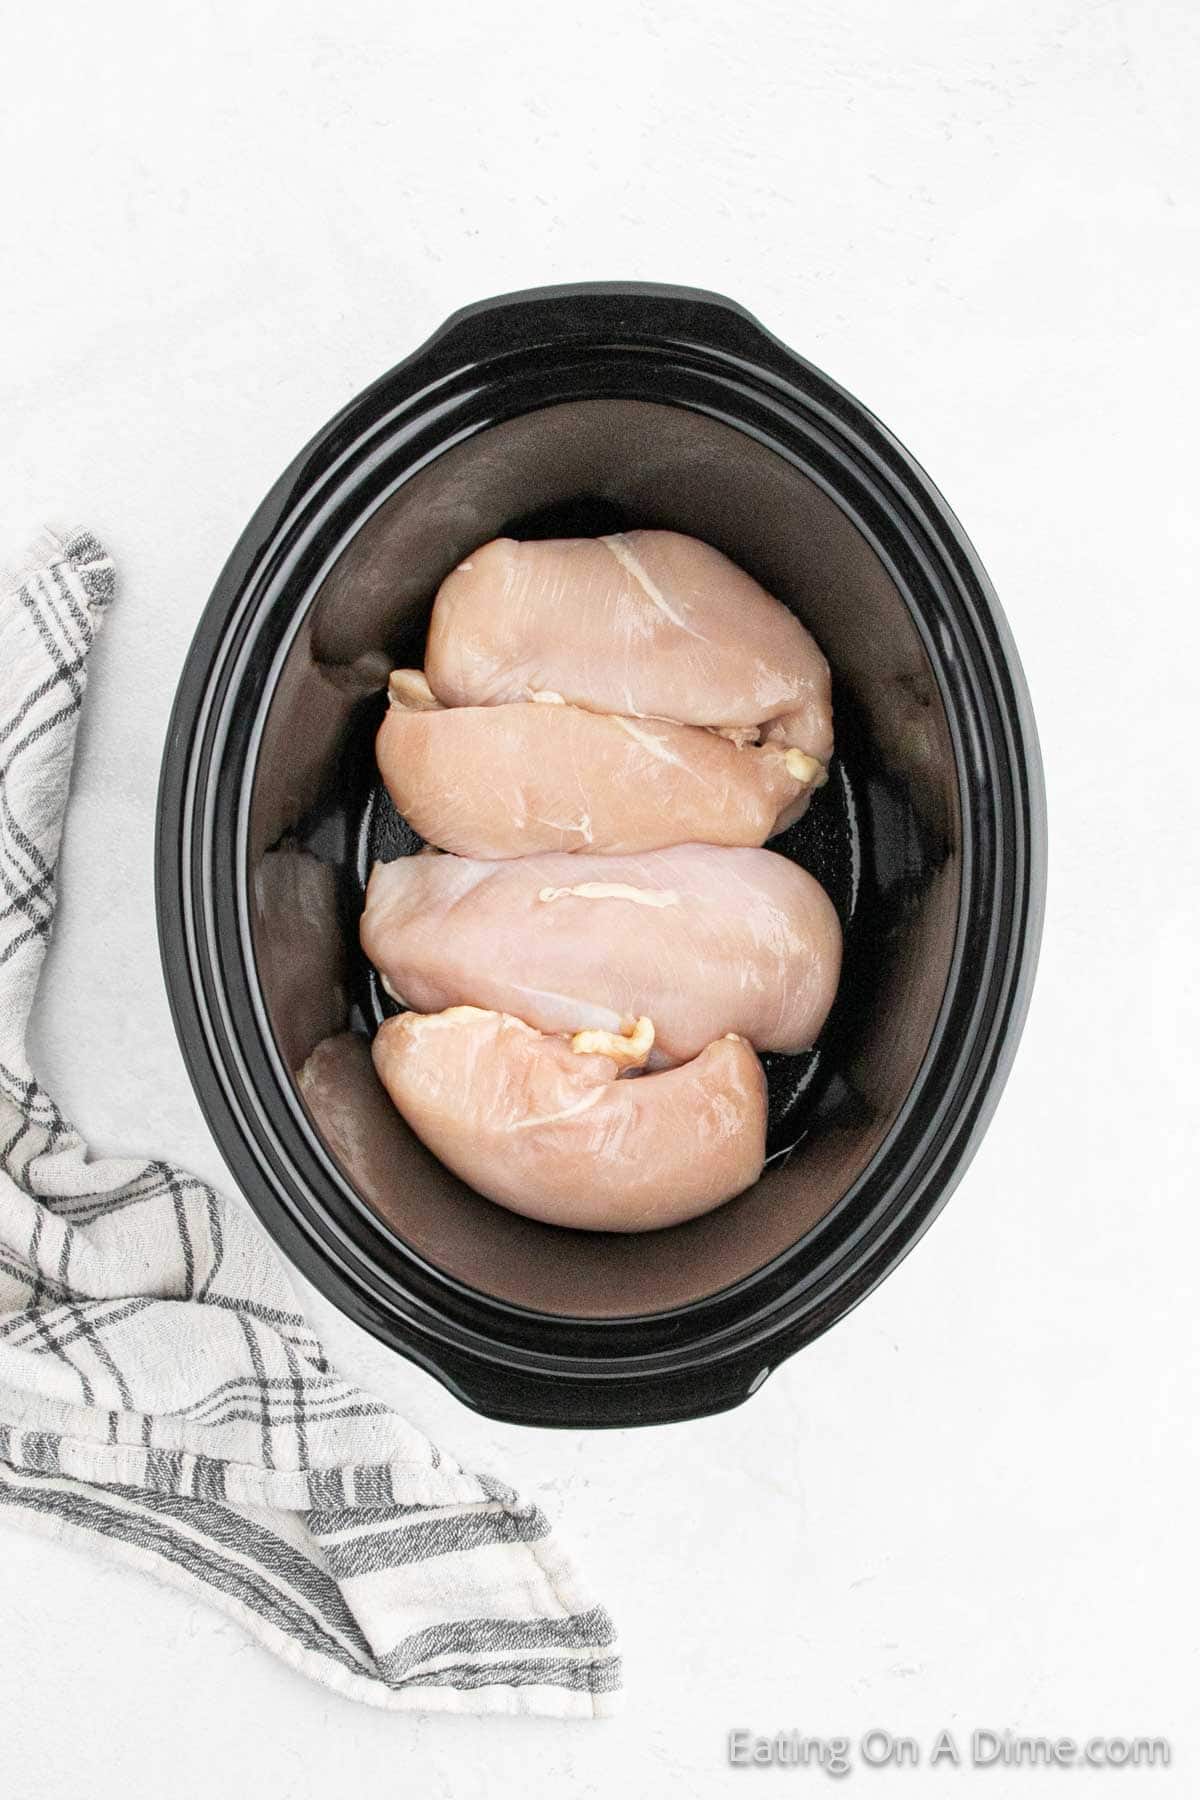 Placing chicken breast in the slow cooker